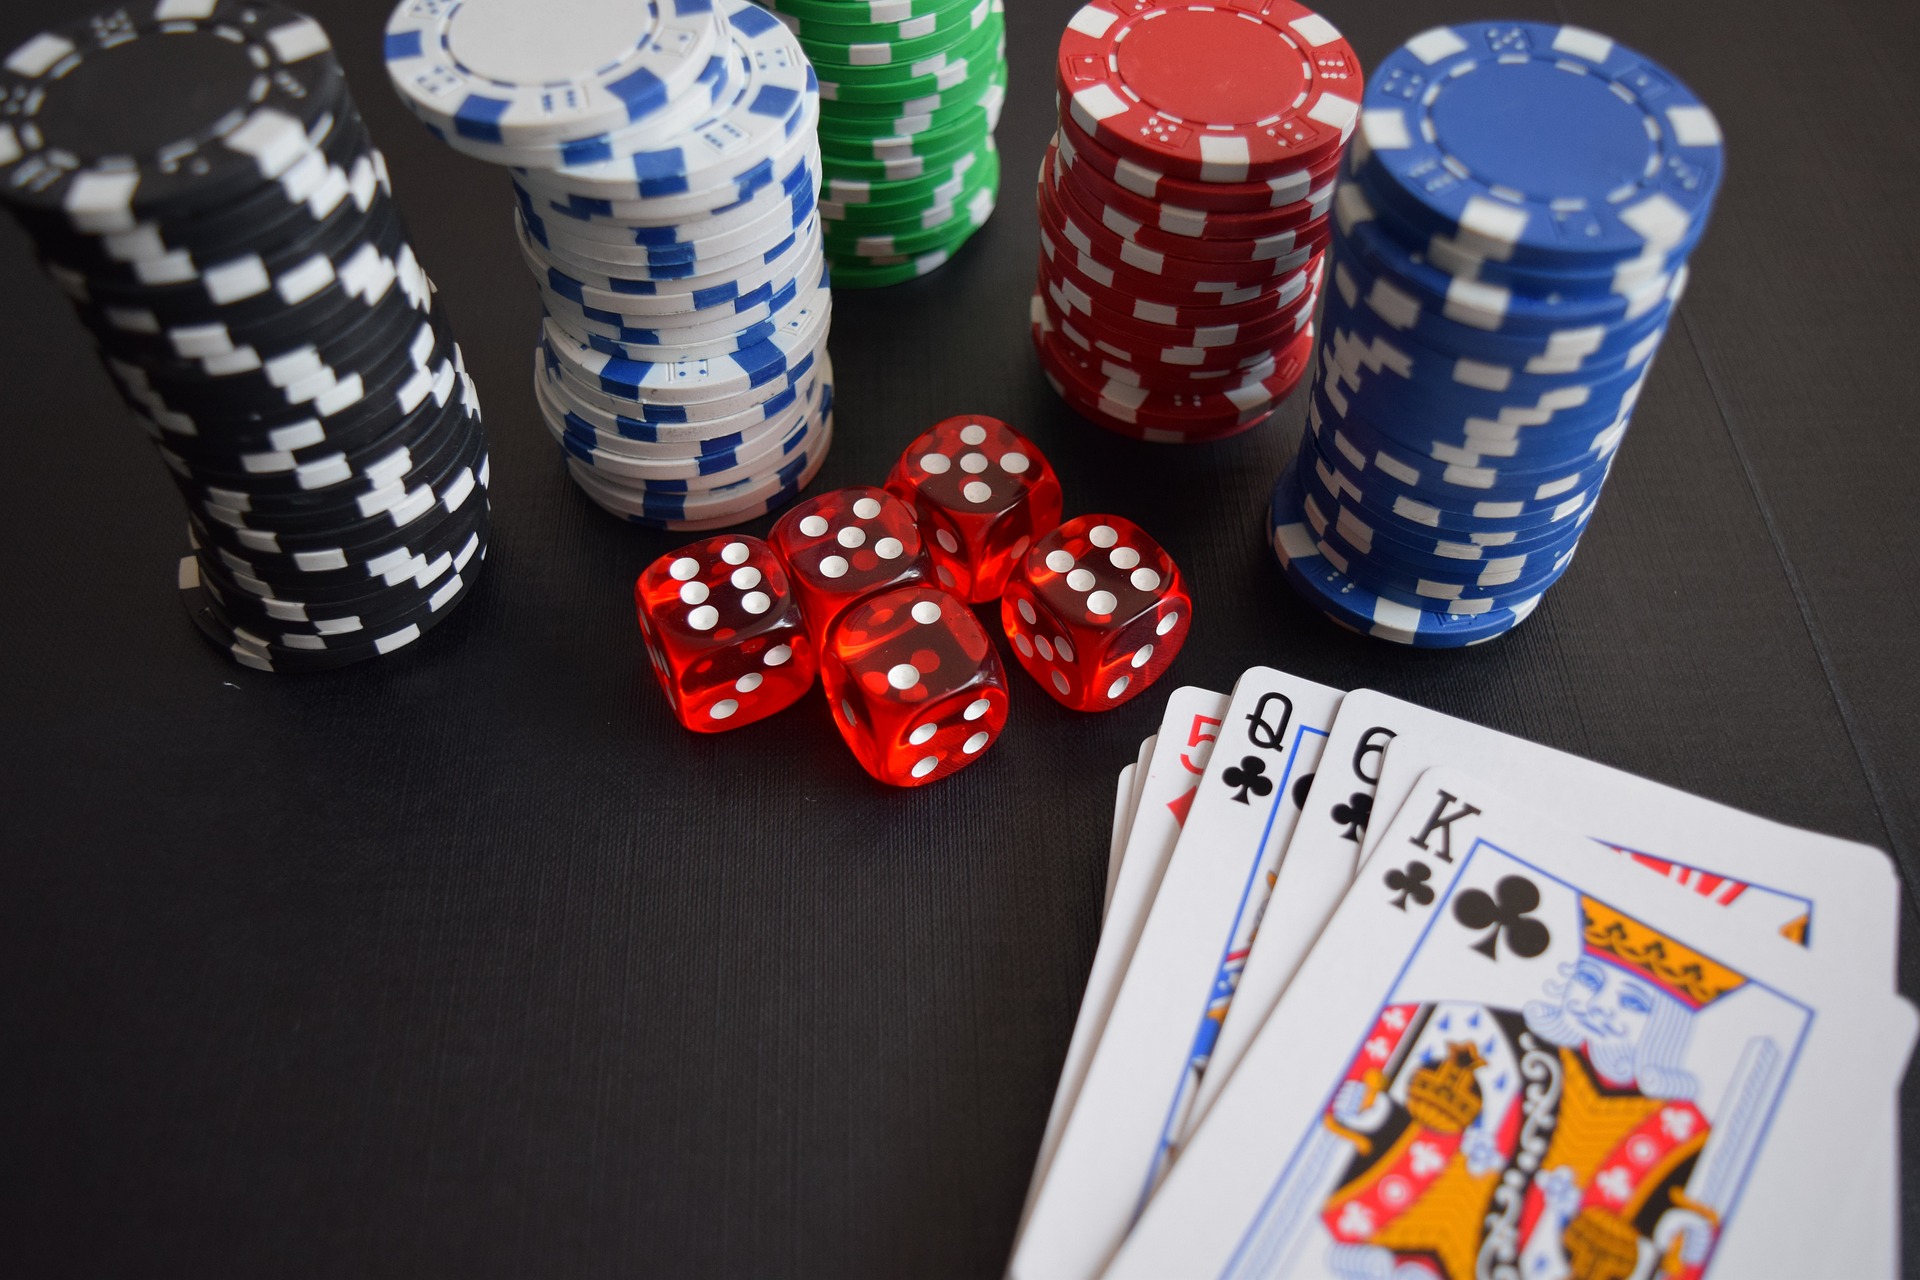 5 Mistakes To Avoid When Playing Casino Games Online